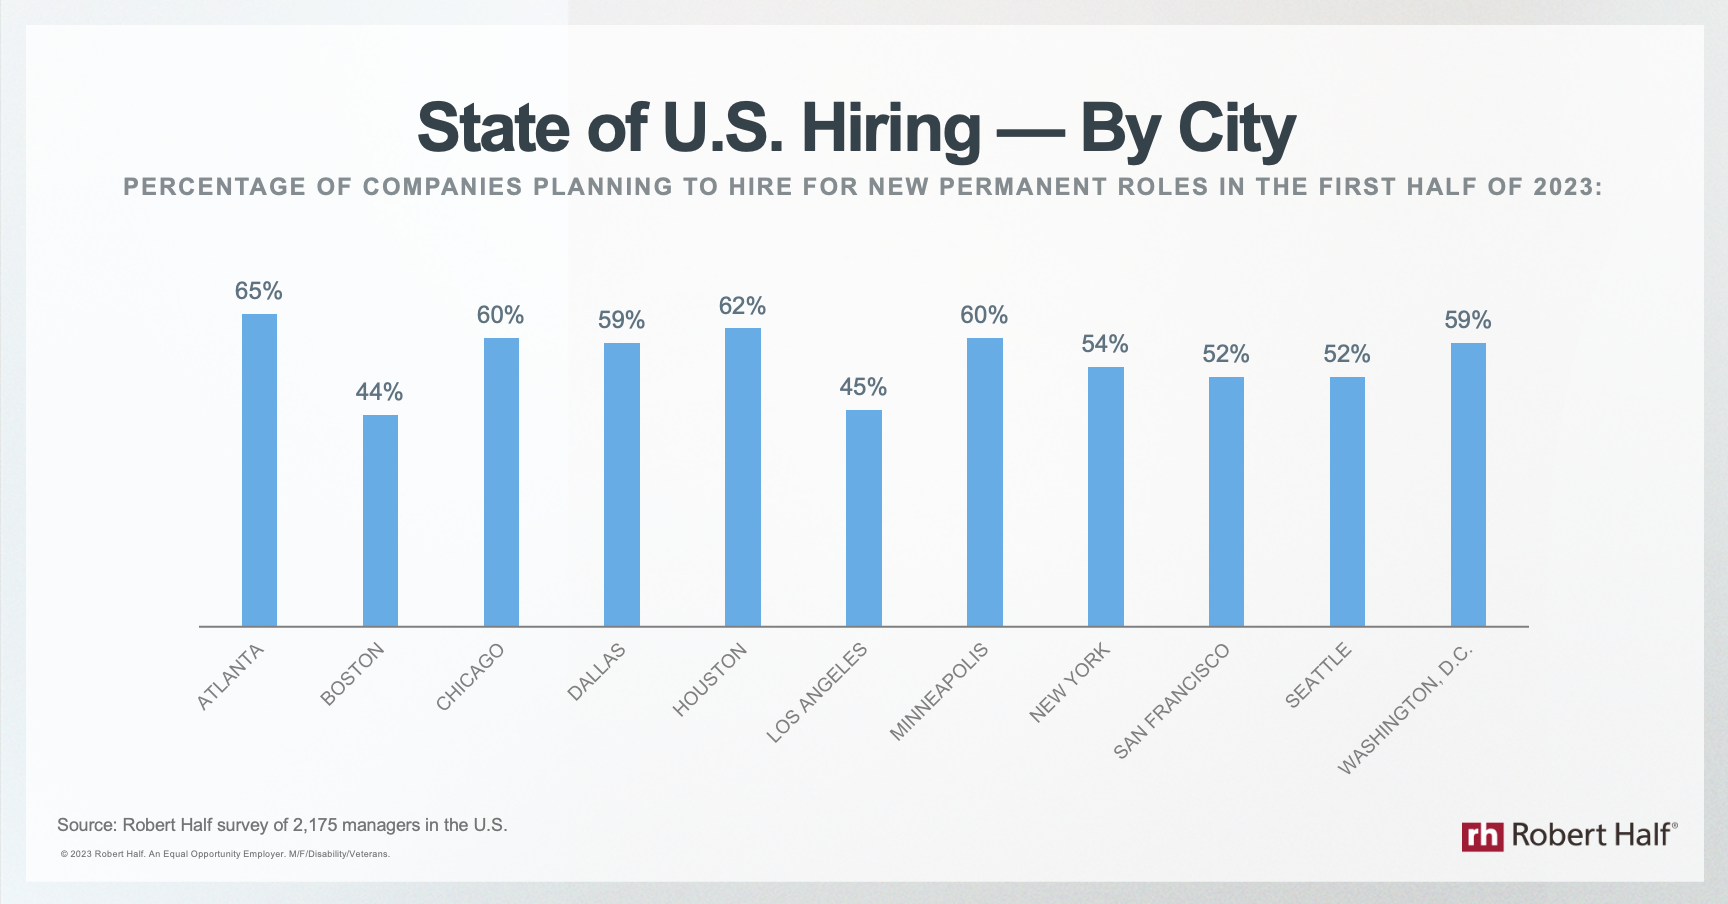 State of U.S. Hiring - By City